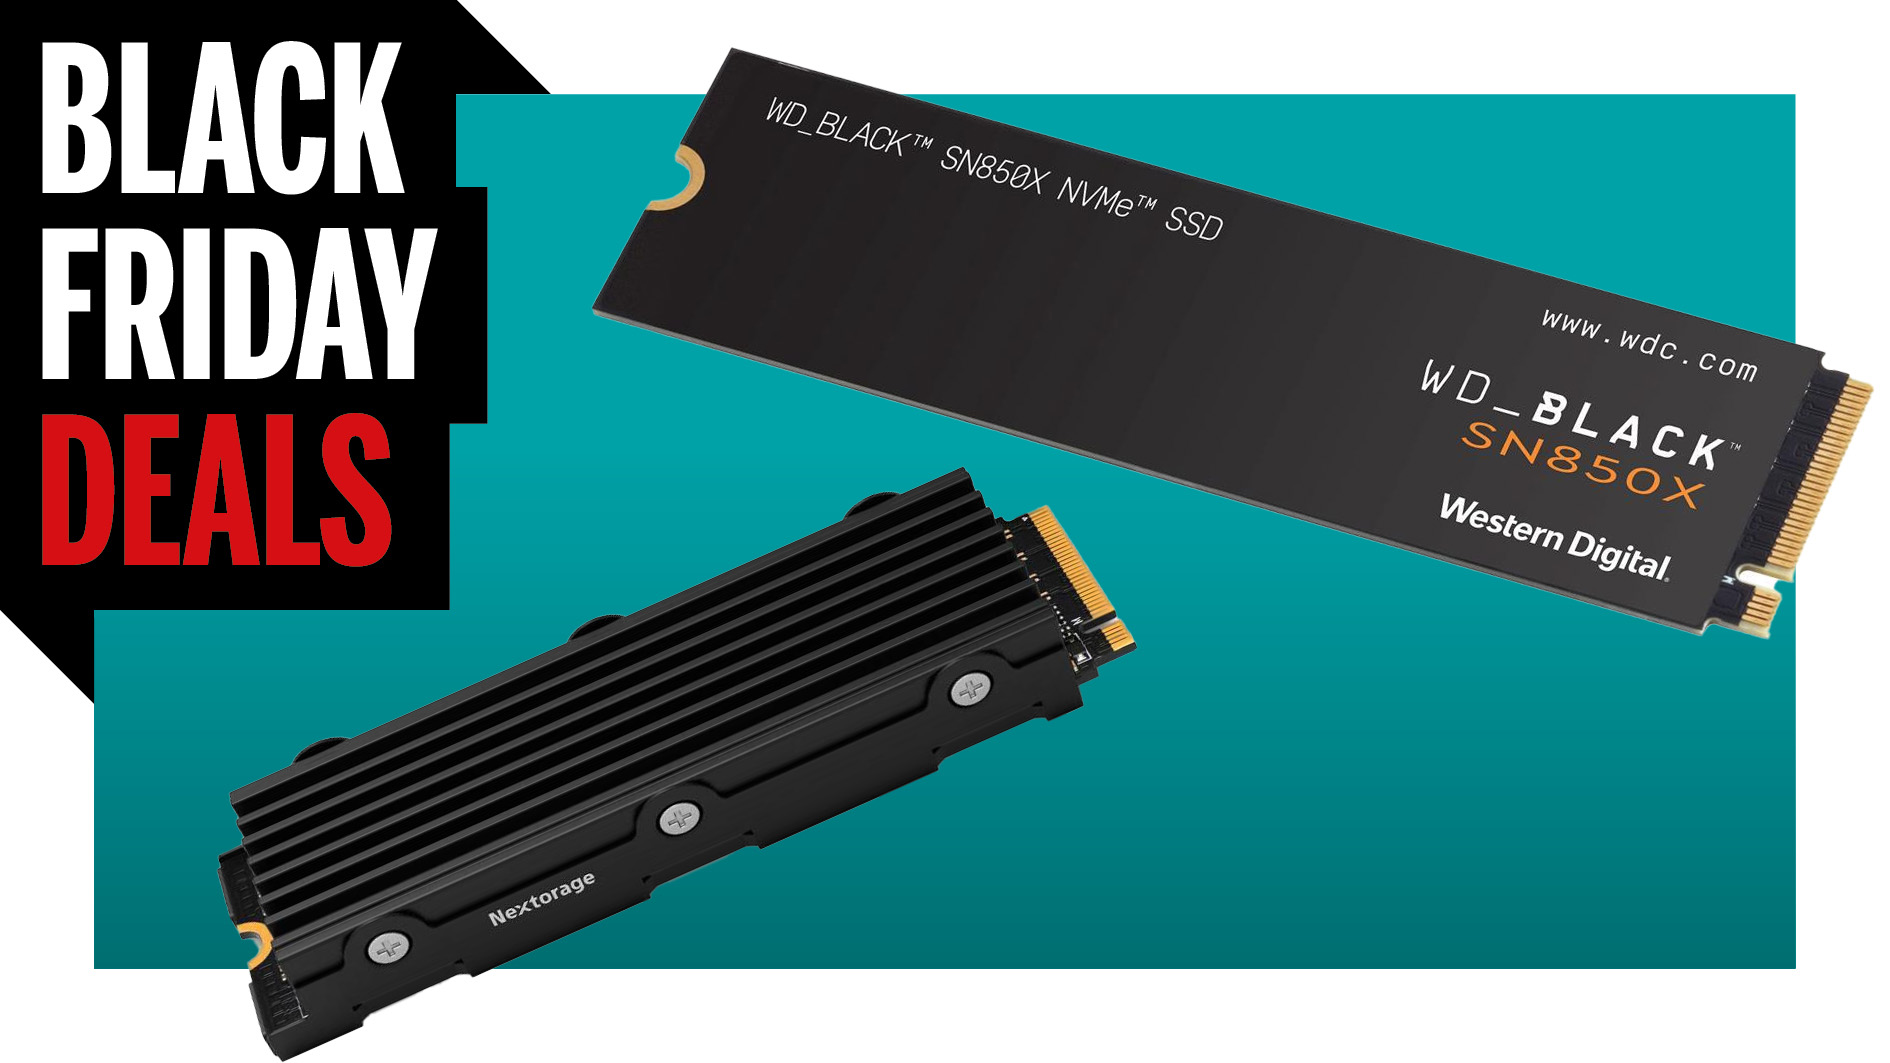 Samsung's new 980 Pro PCIe 4.0 M.2 SSD offers read speeds up to 7,000MB/s:  Digital Photography Review